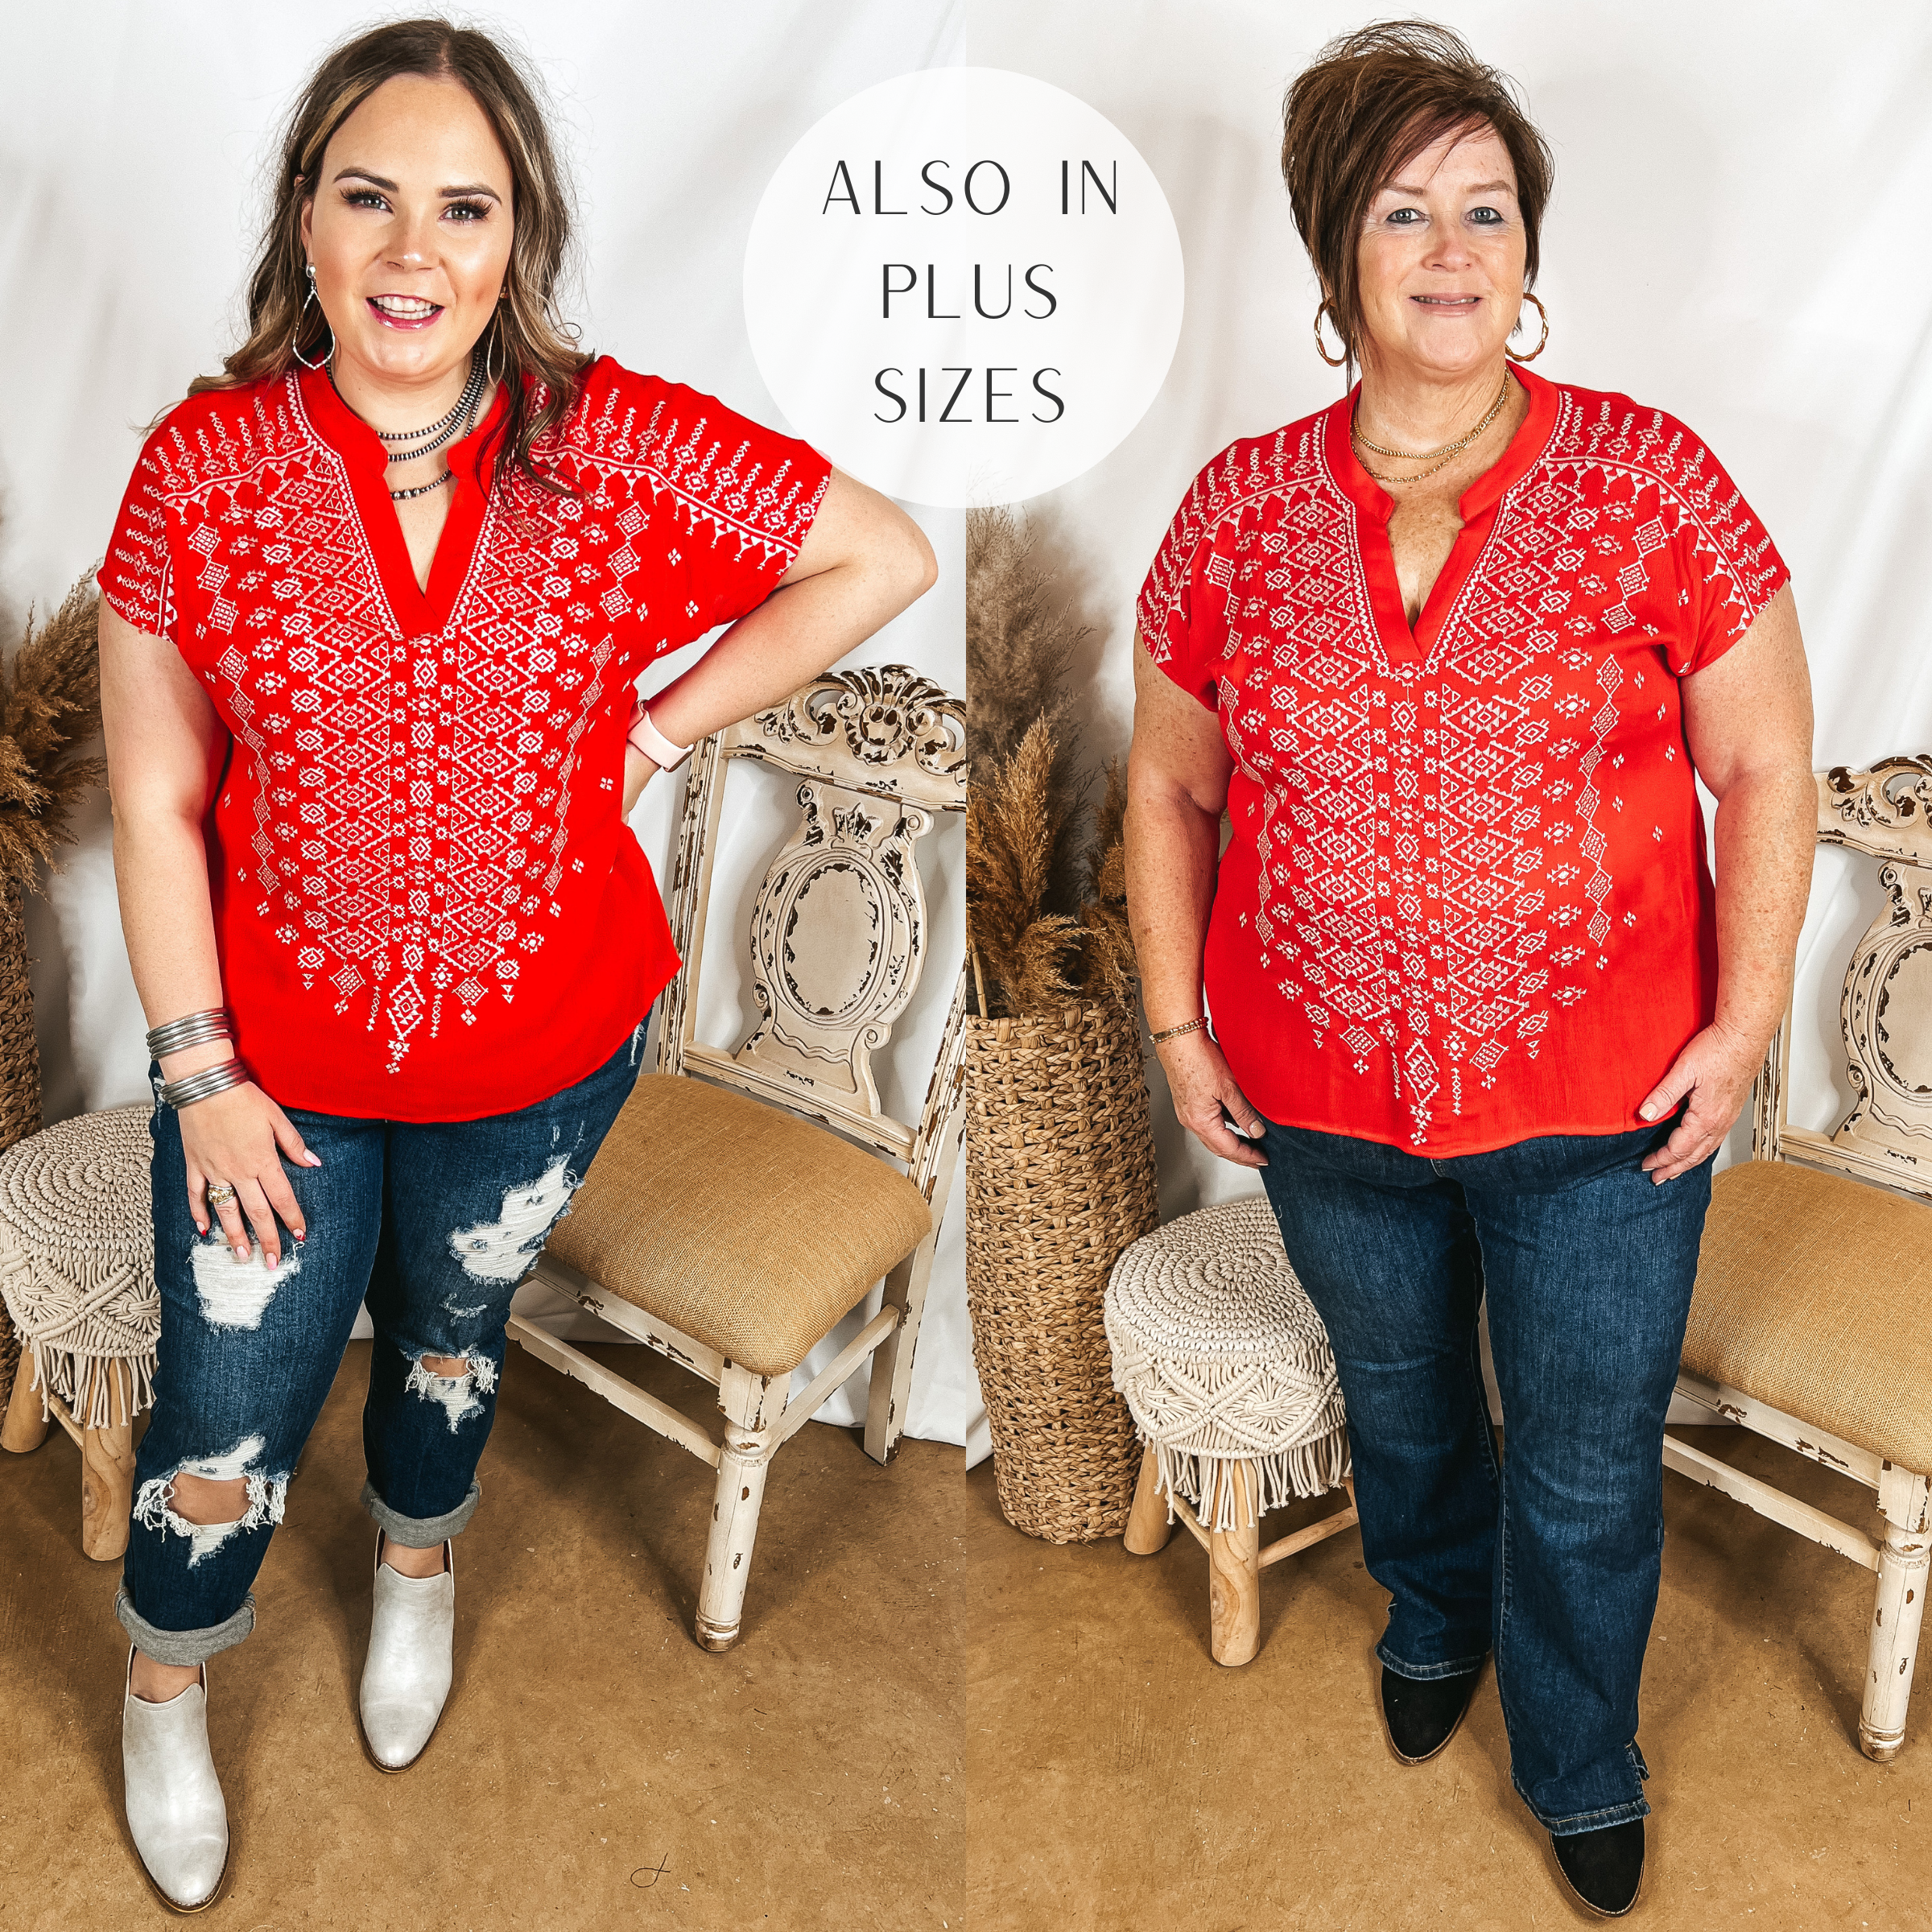 Models are wearing a red embroidered top. Size large model has it paired with white booties and distressed boyfriend jeans. Plus size model has it paired with bootcut jeans, black booties, and gold jewelry.